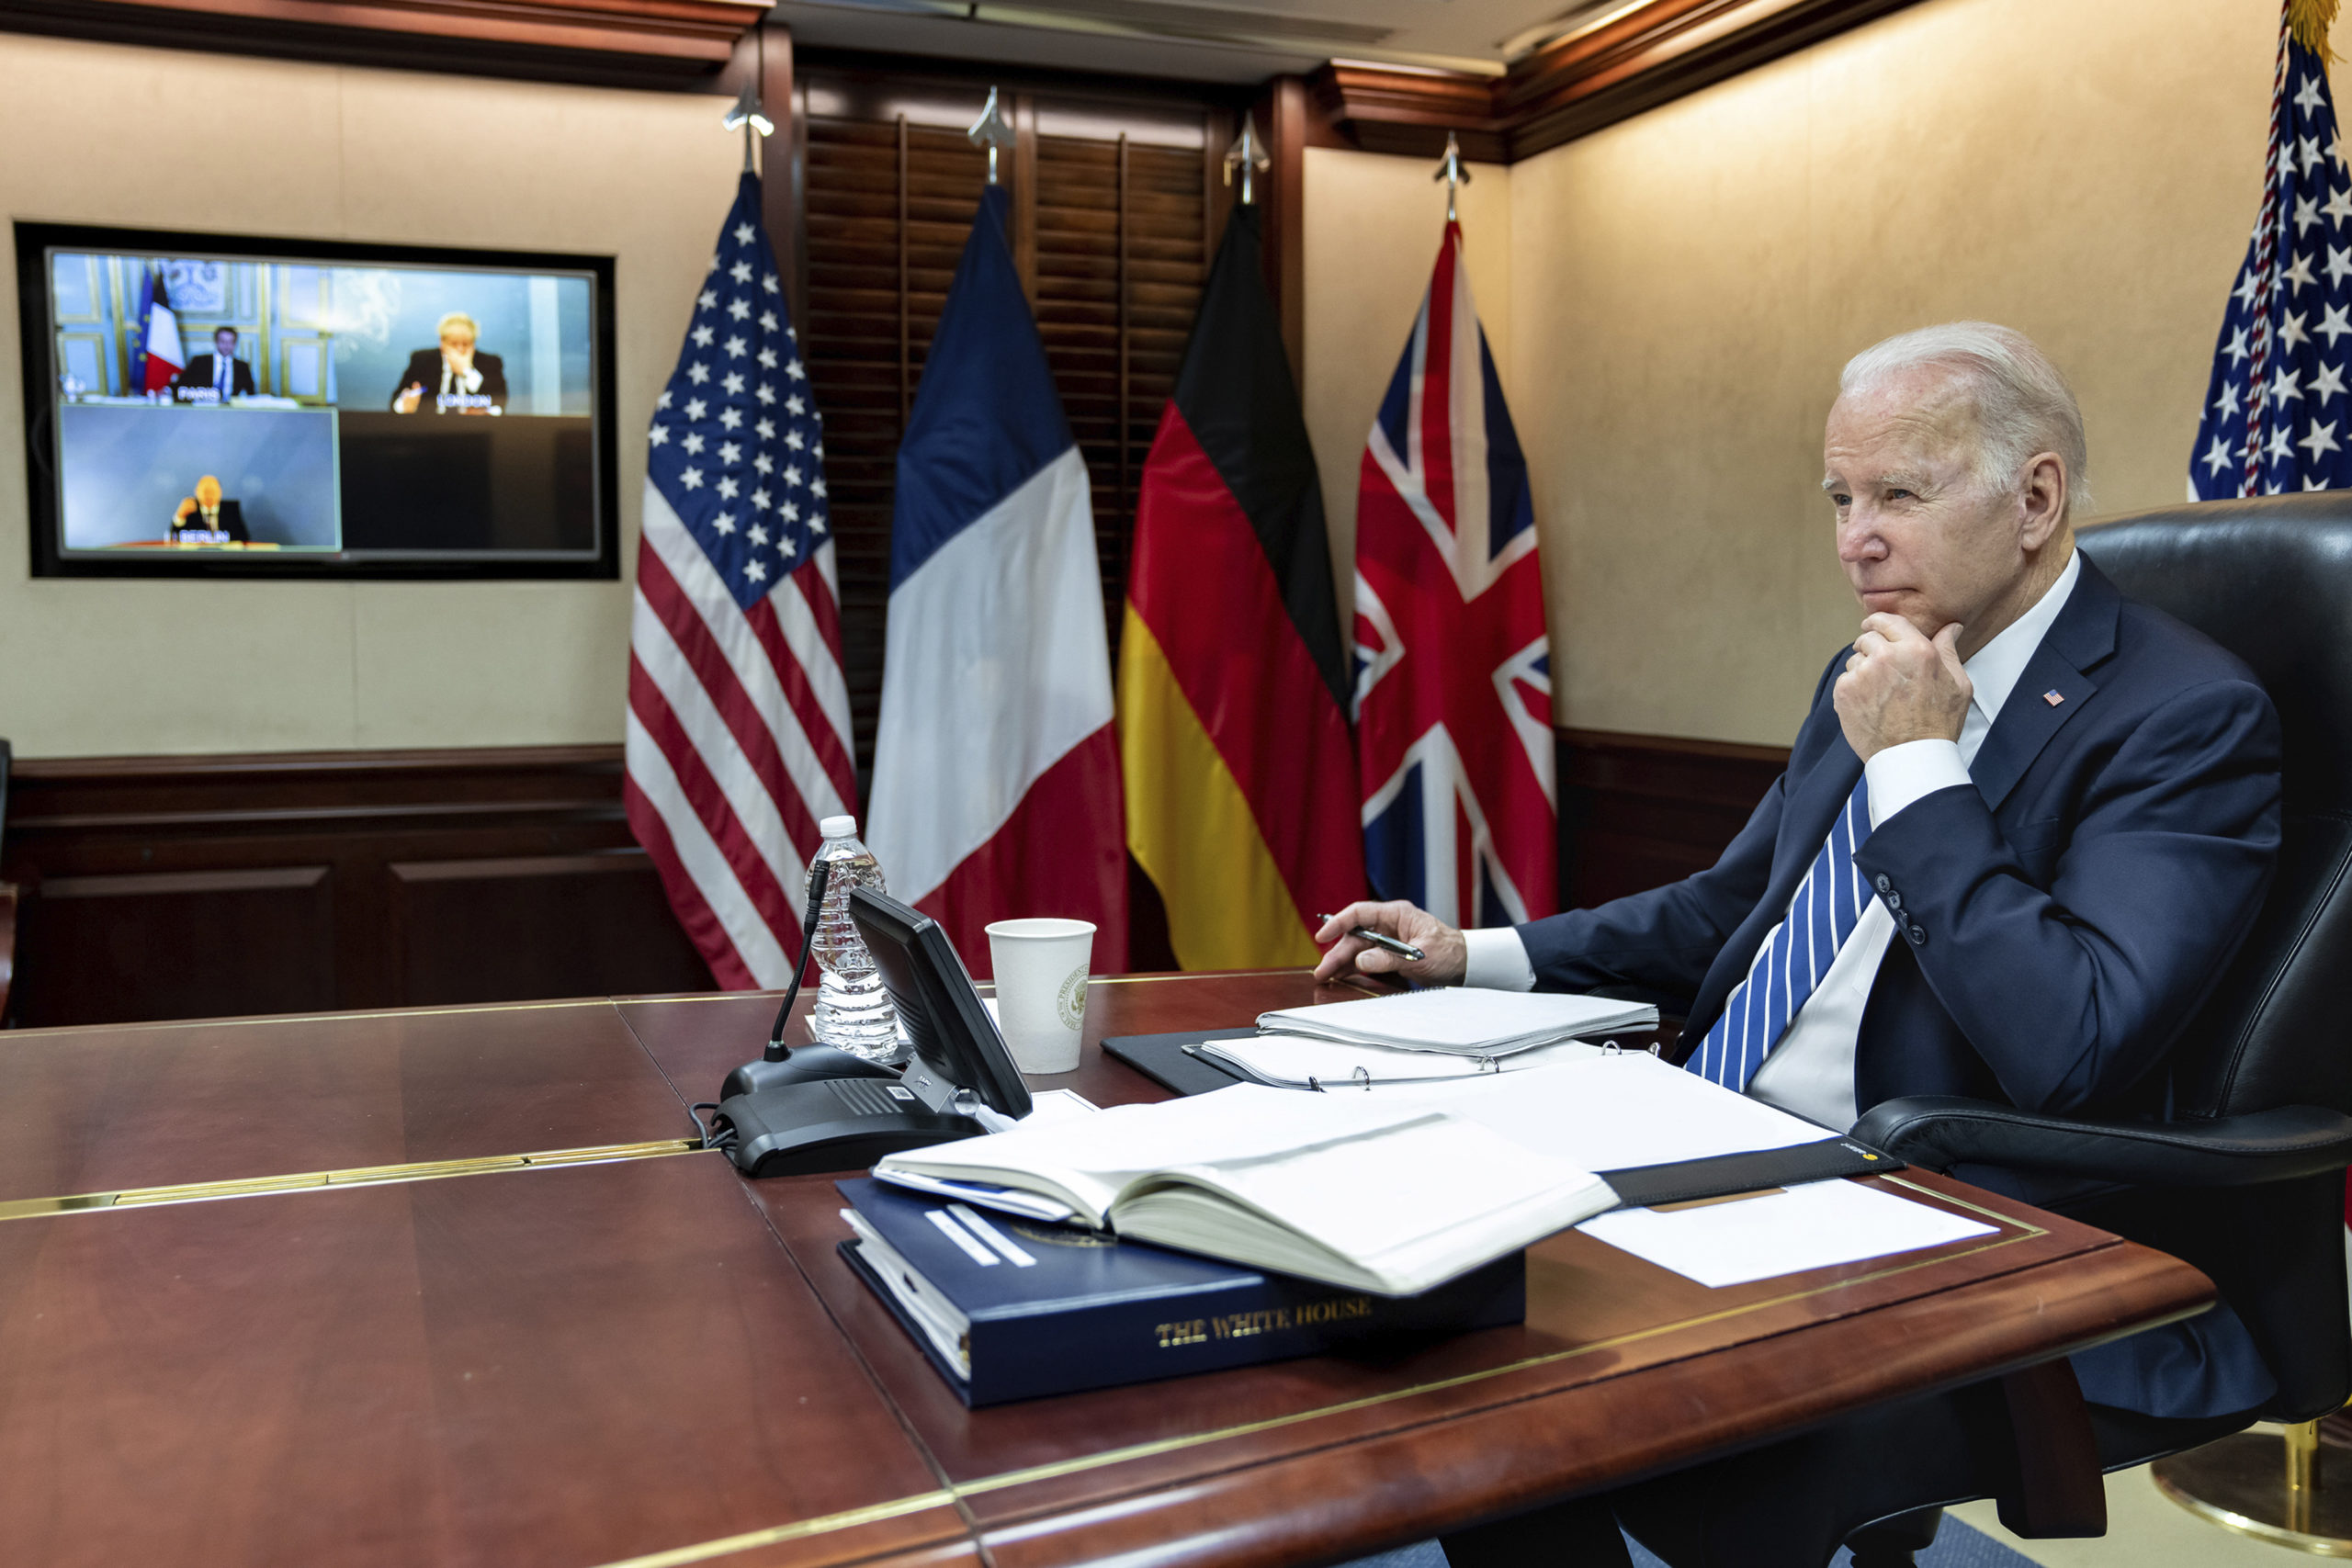 President Joe Biden listens during a secure video call with French President Emmanuel Macron, German Chancellor Olaf Scholz and British Prime Minister Boris Johnson in the Situation Room at the White House on Monday.